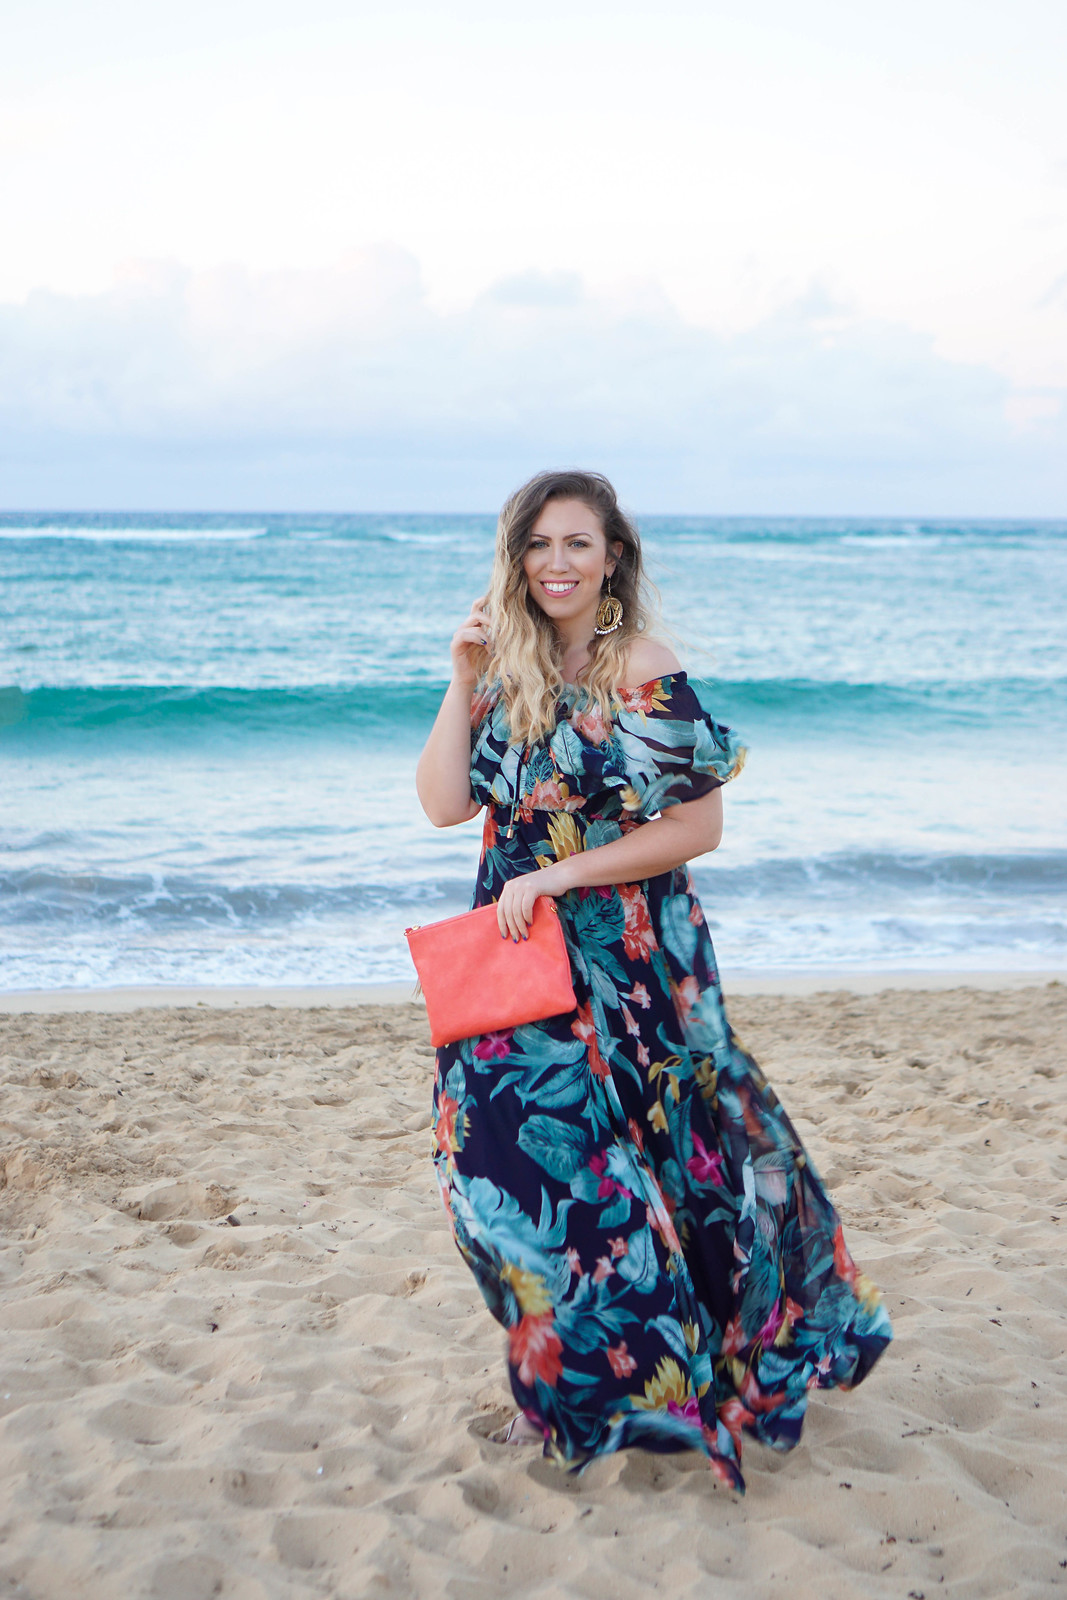 My Favorite Spring Trends Lulu's Navy Floral Print Off Shoulder Maxi Dress Punta Cana Dominican Republic Beach Vacation Outfit